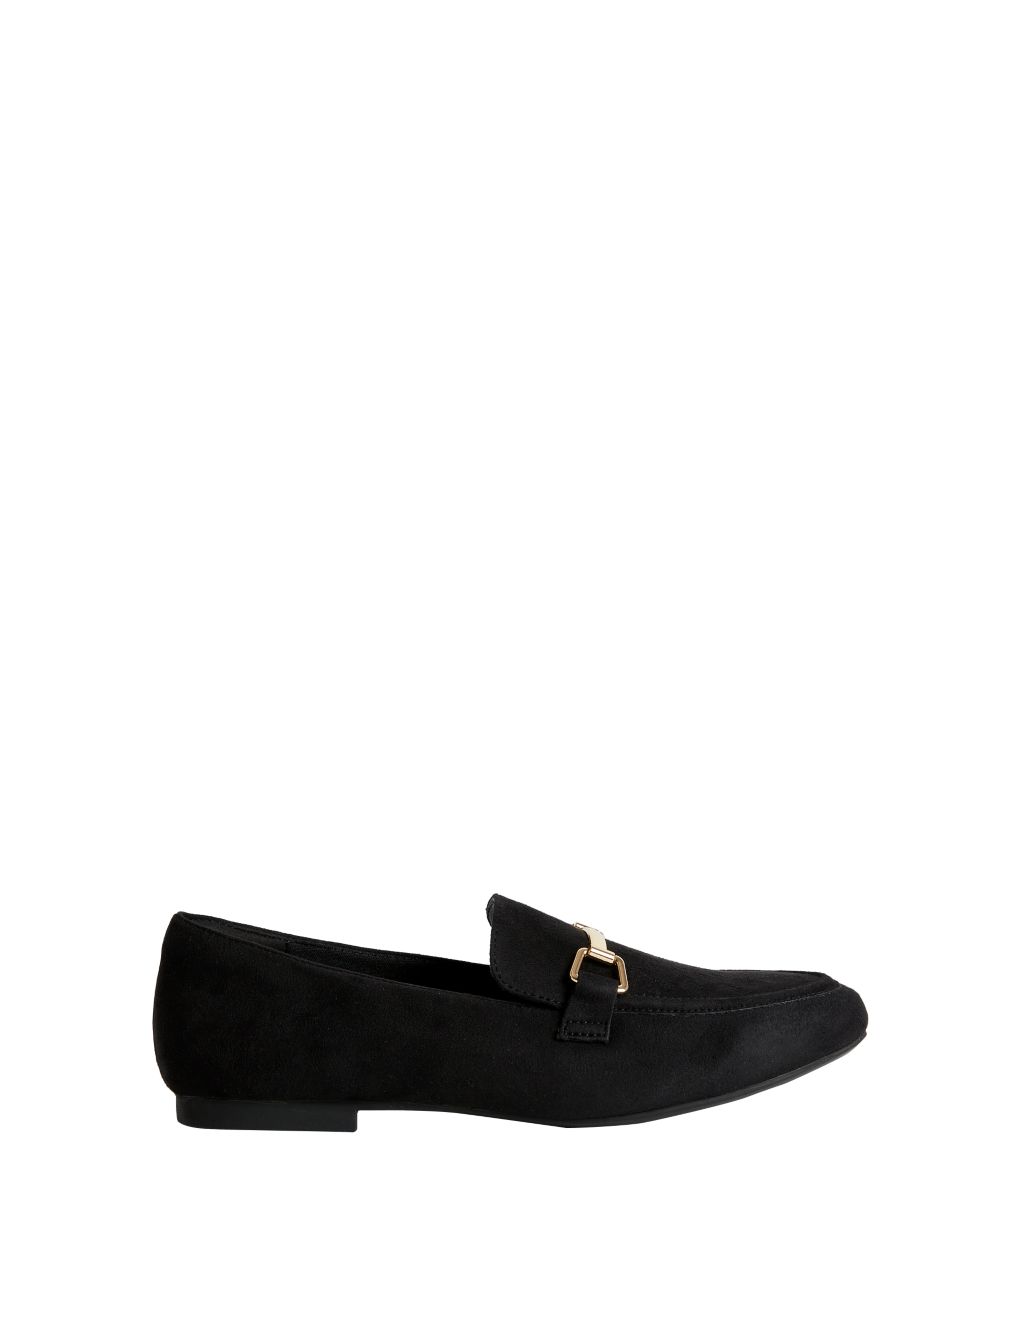 Trim Detail Slip On Flat Loafers | M&S Collection | M&S